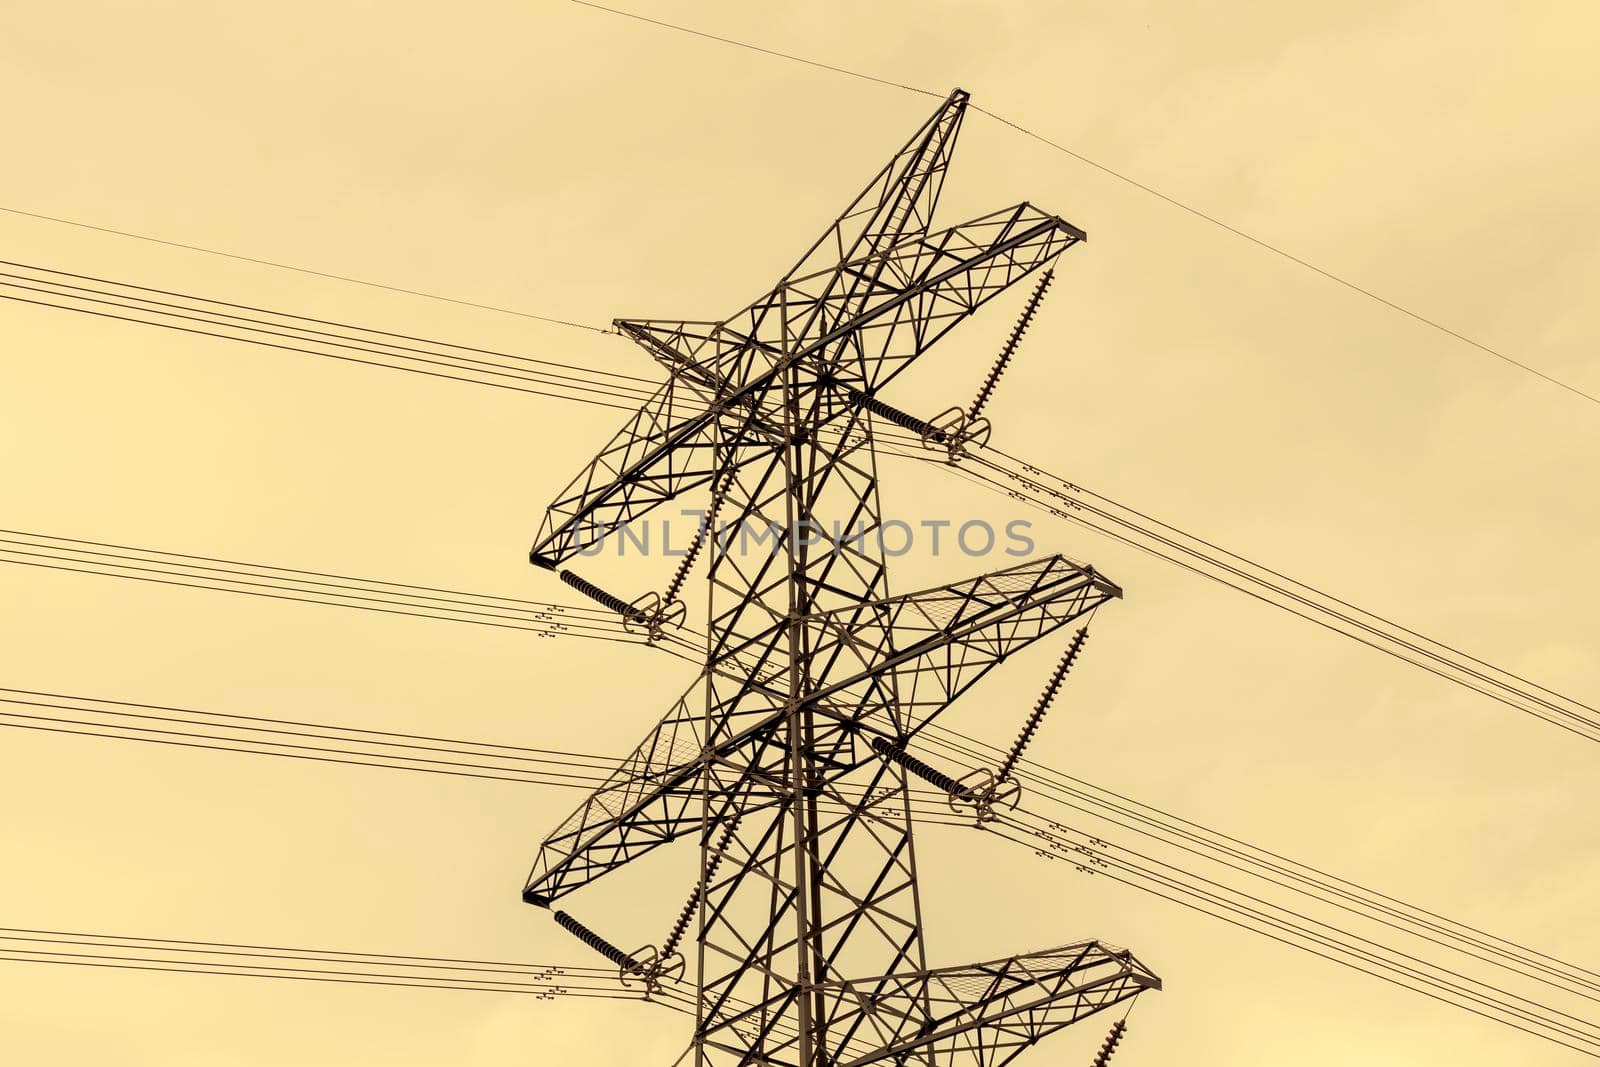 Close up view of the upper section of a steel Transmission Tower by WittkePhotos